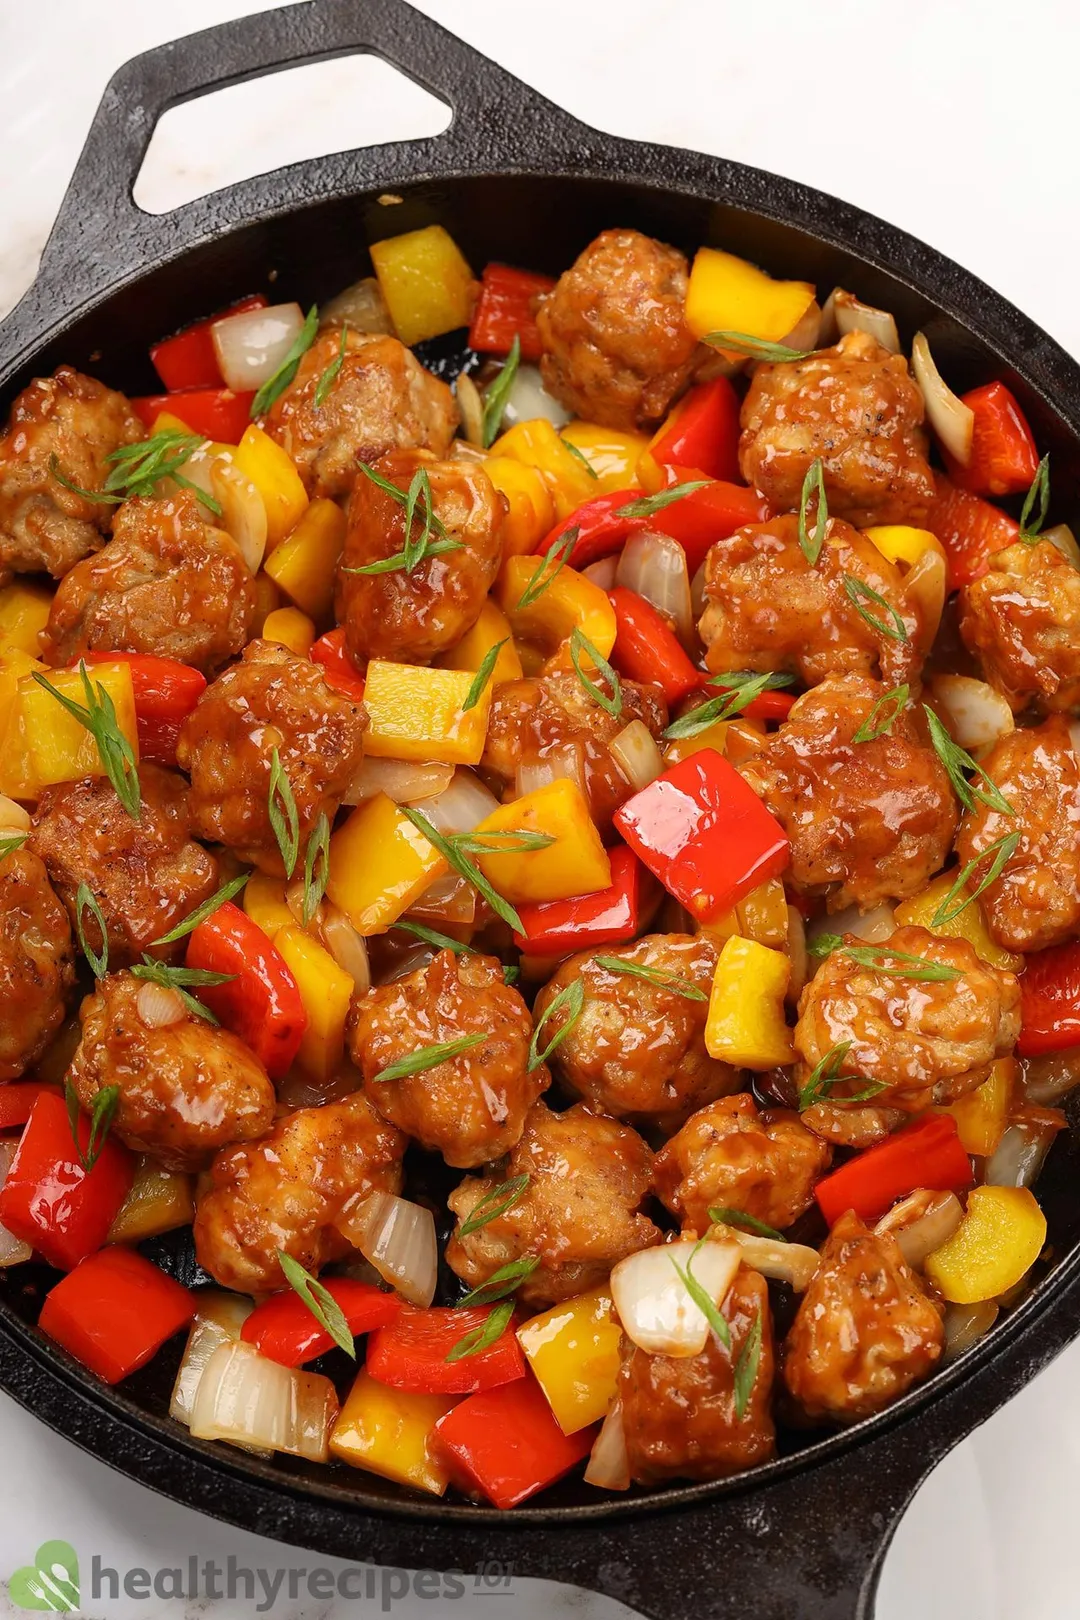 a cast iron skillet of cooked chicken manchurian